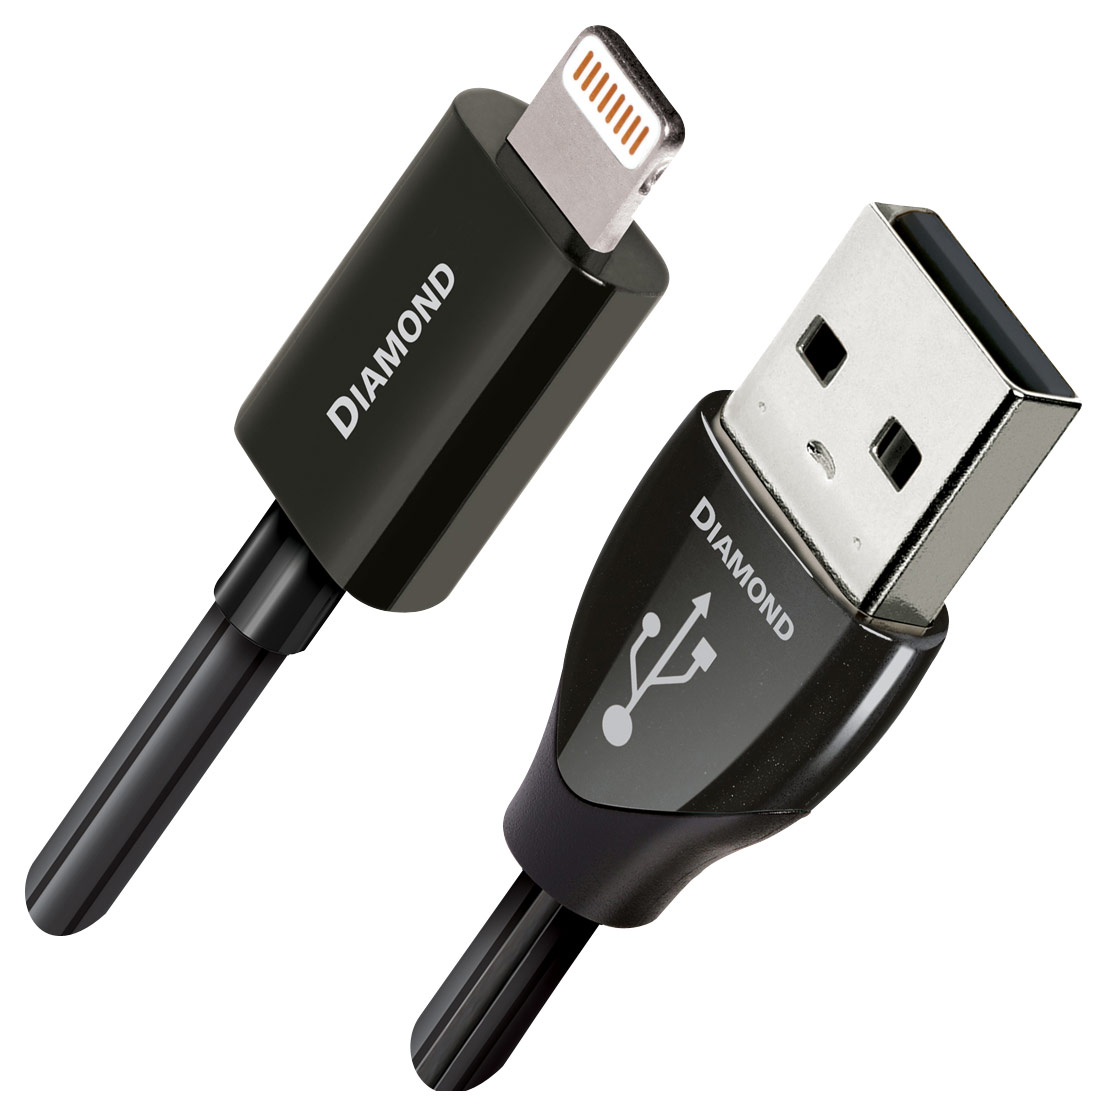 AudioQuest - Diamond 2.5' Lightning-to-USB Charge-and-Sync Cable - Black